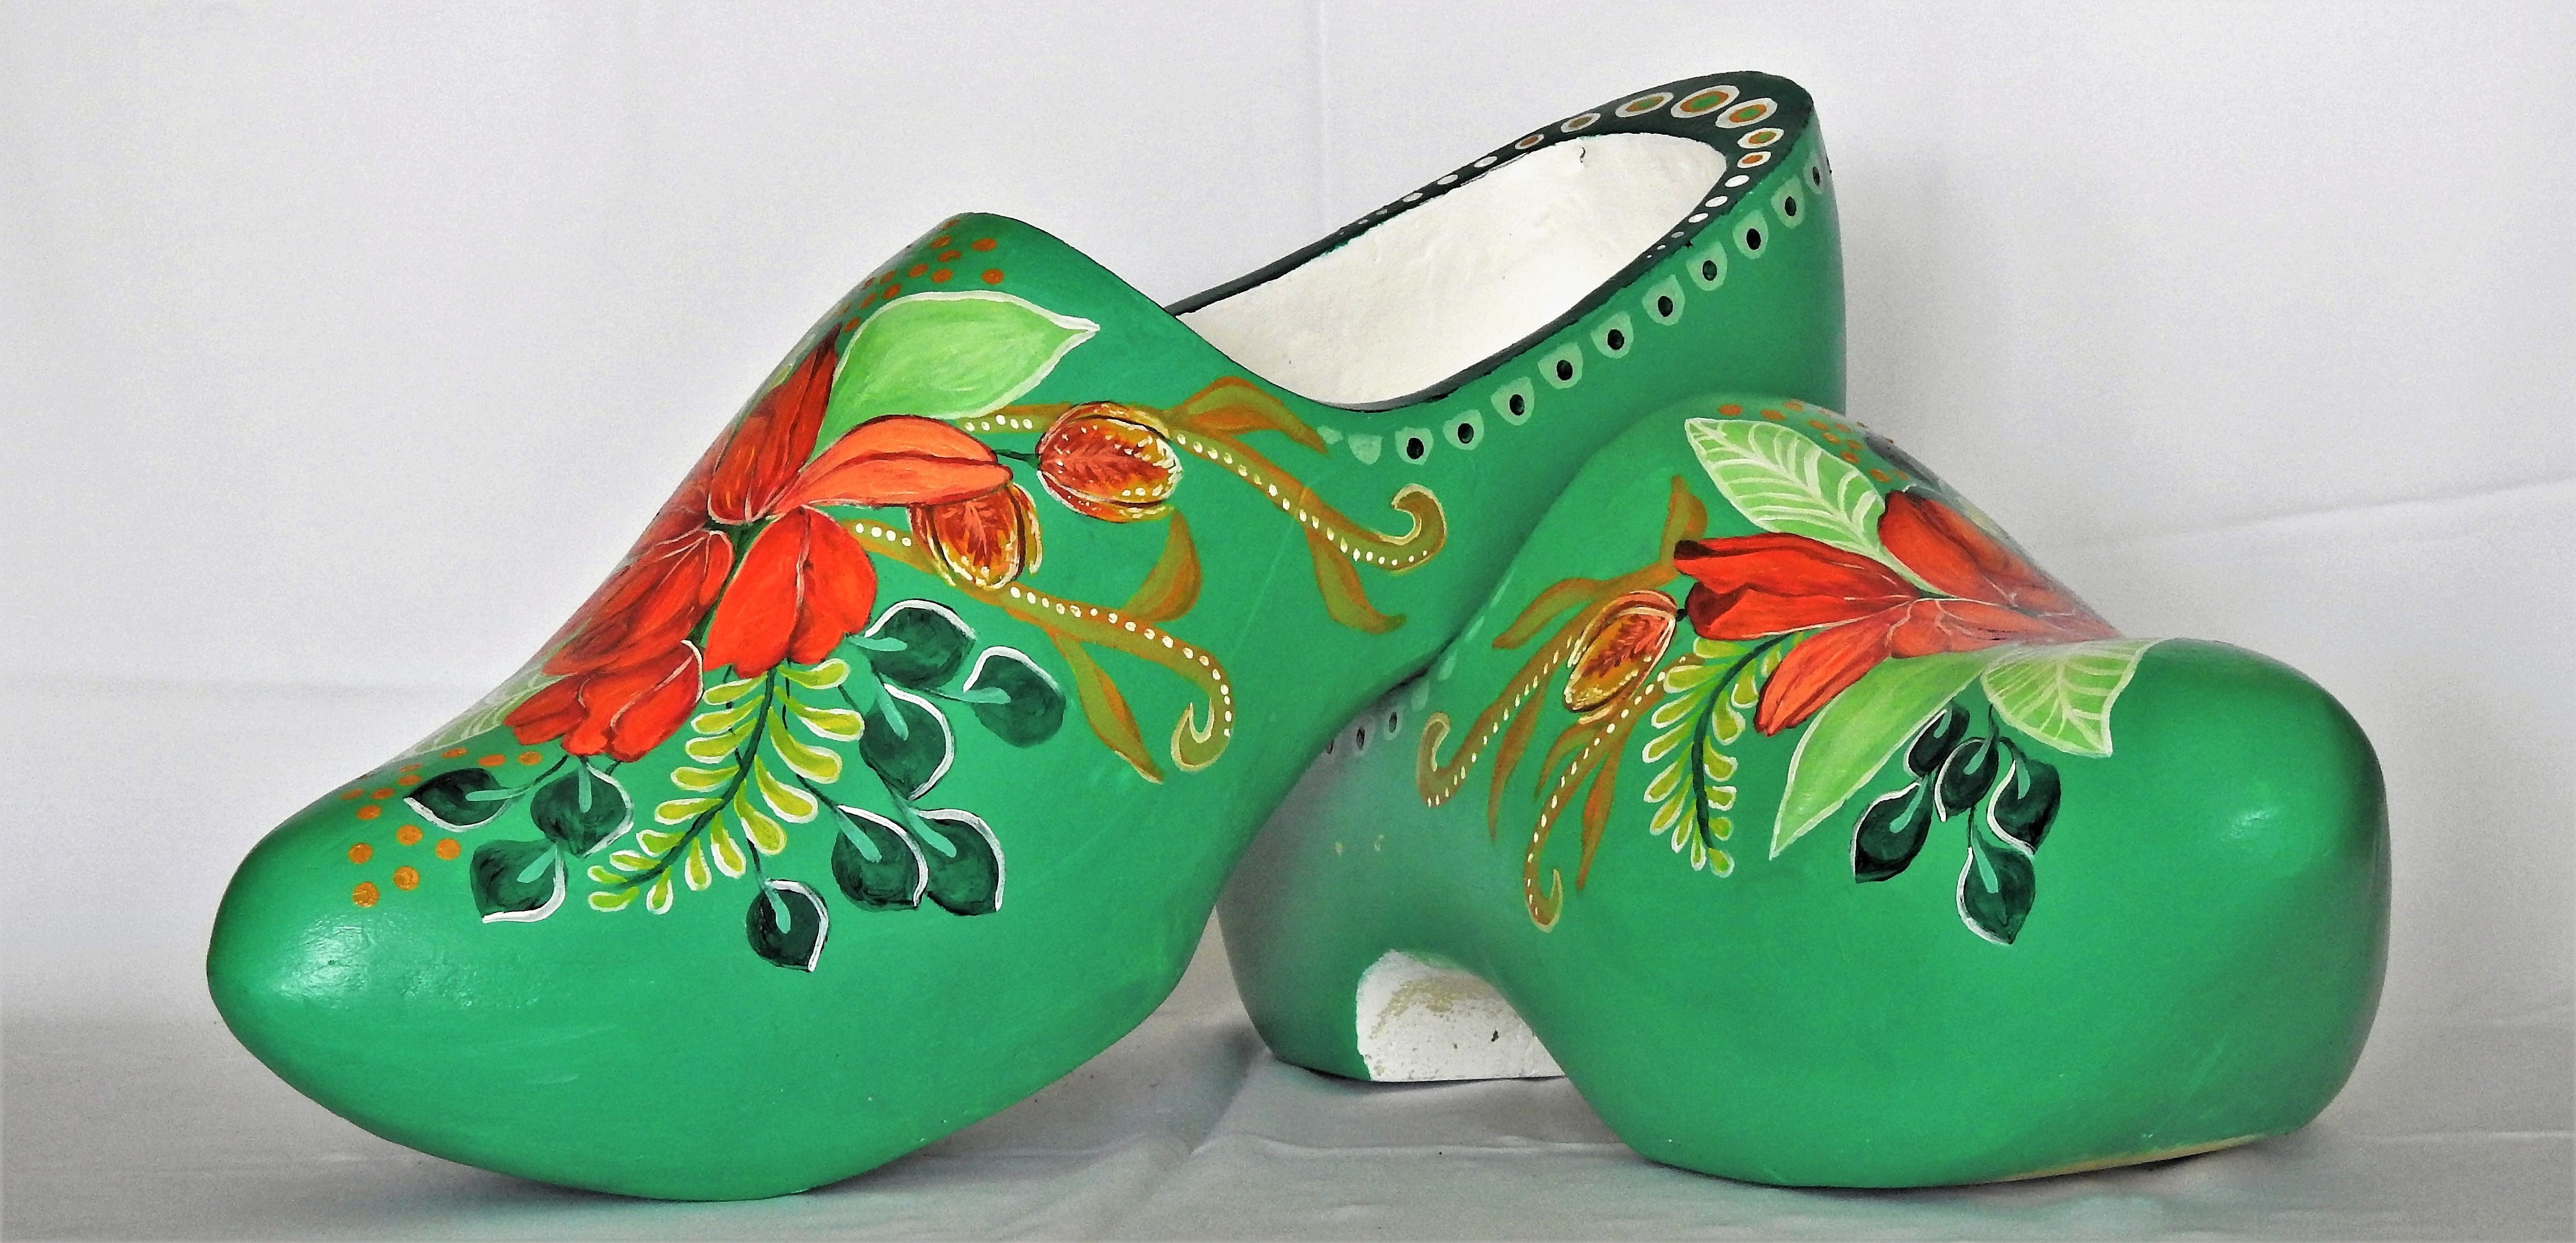 Klompen Pair of shoe art pieces recovered for Tulip Time